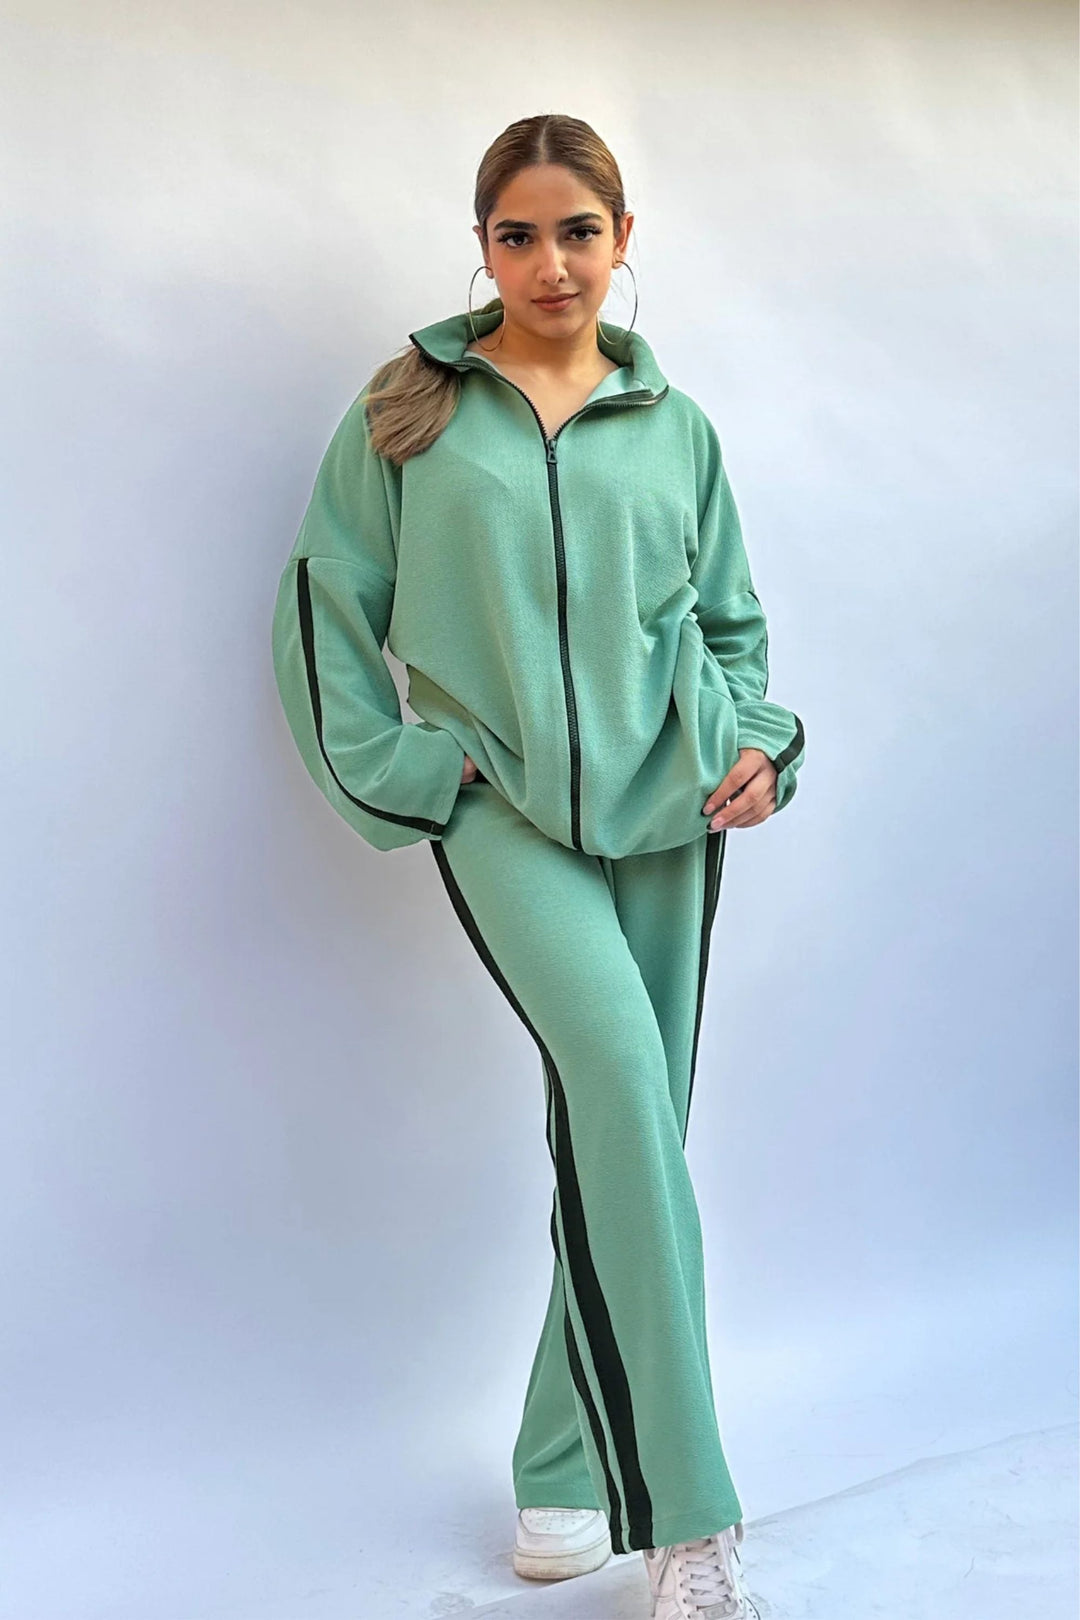 s Top Trending Loungewear Pieces Include Sweatshirts and Sets